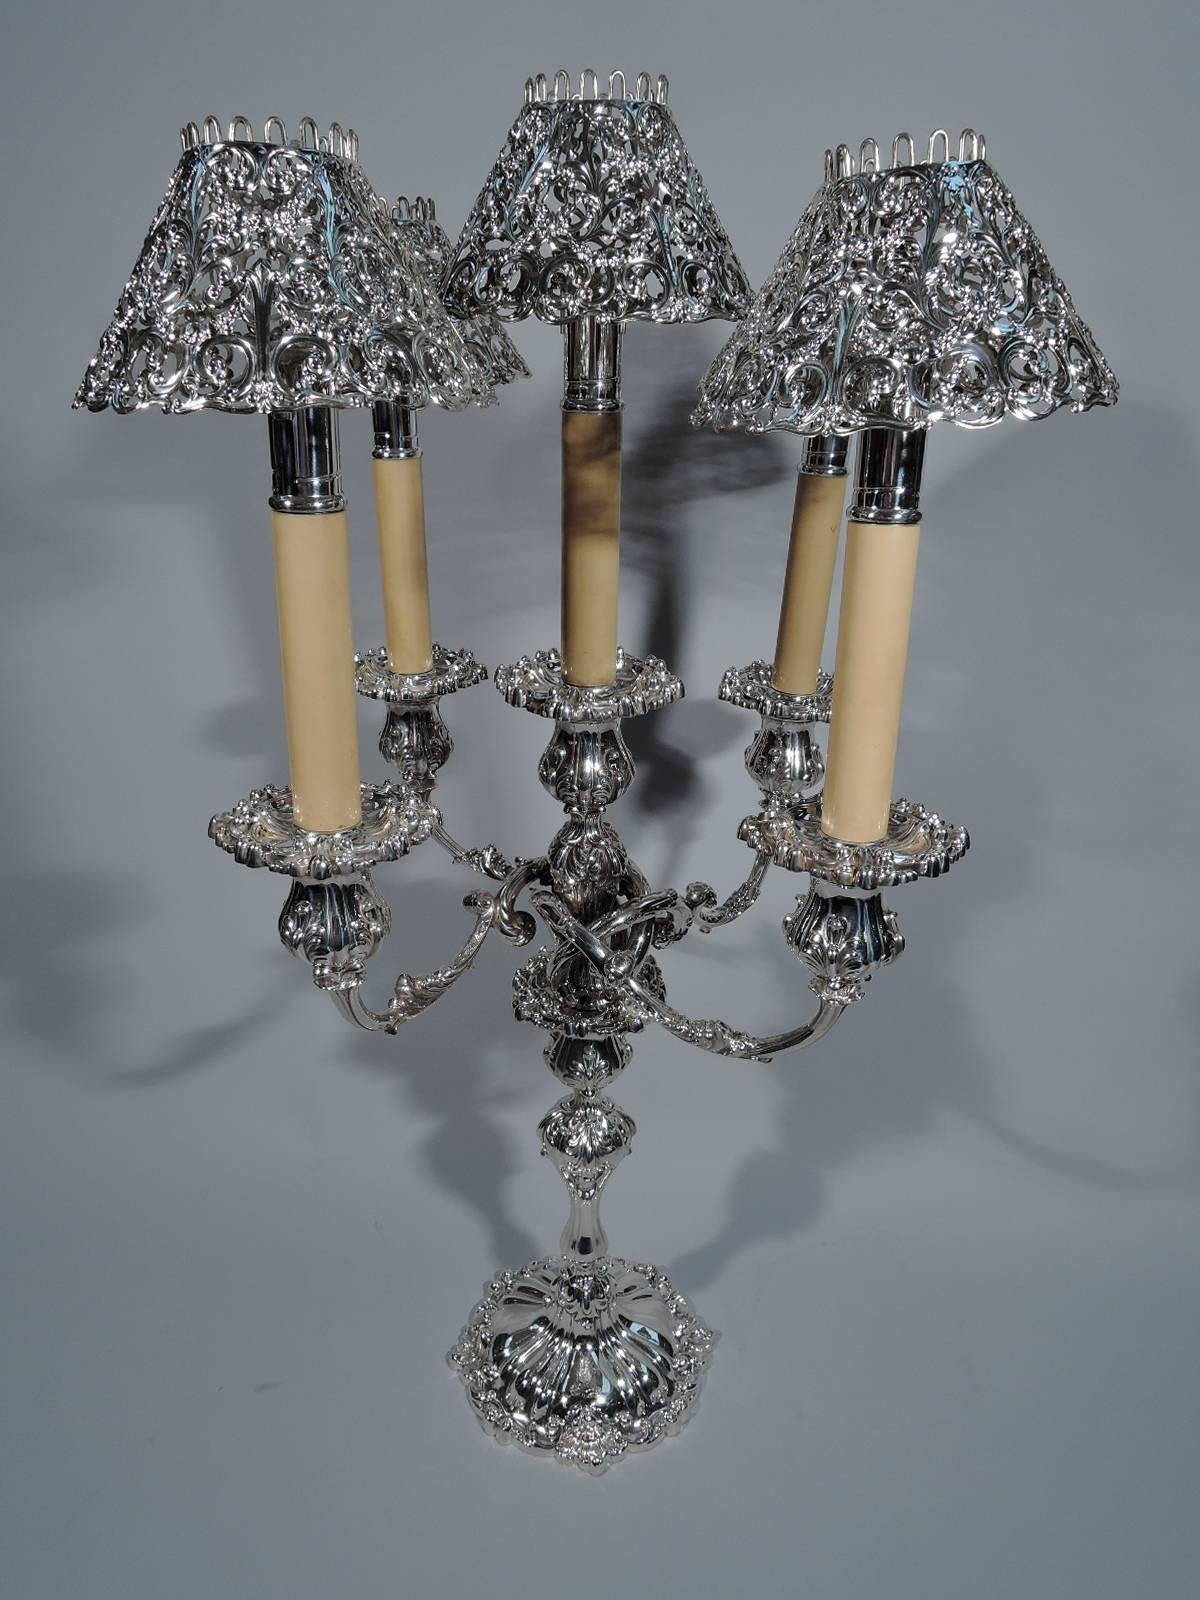 Pair of sterling silver five light candelabra. Made by JE Caldwell in Philadelphia, circa 1880. Each: baluster shaft on raised foot. Central raised light surrounded by four interlacing scrolled arms, each terminating in single light. Lots of dense